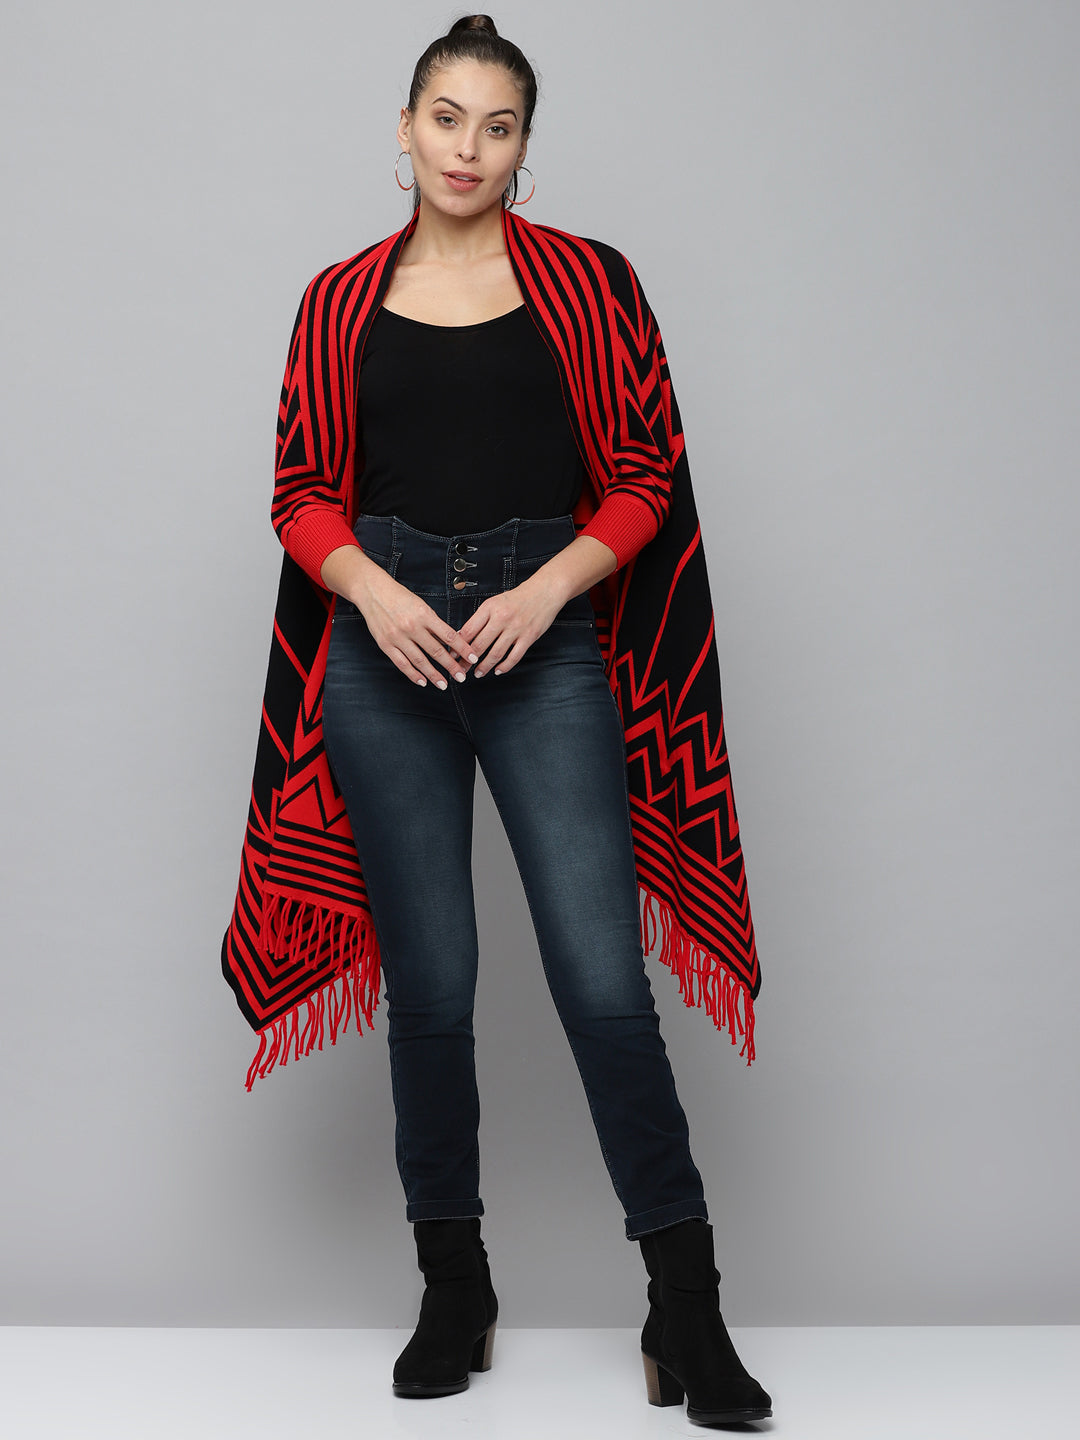 Women's Red Striped Poncho Sweater